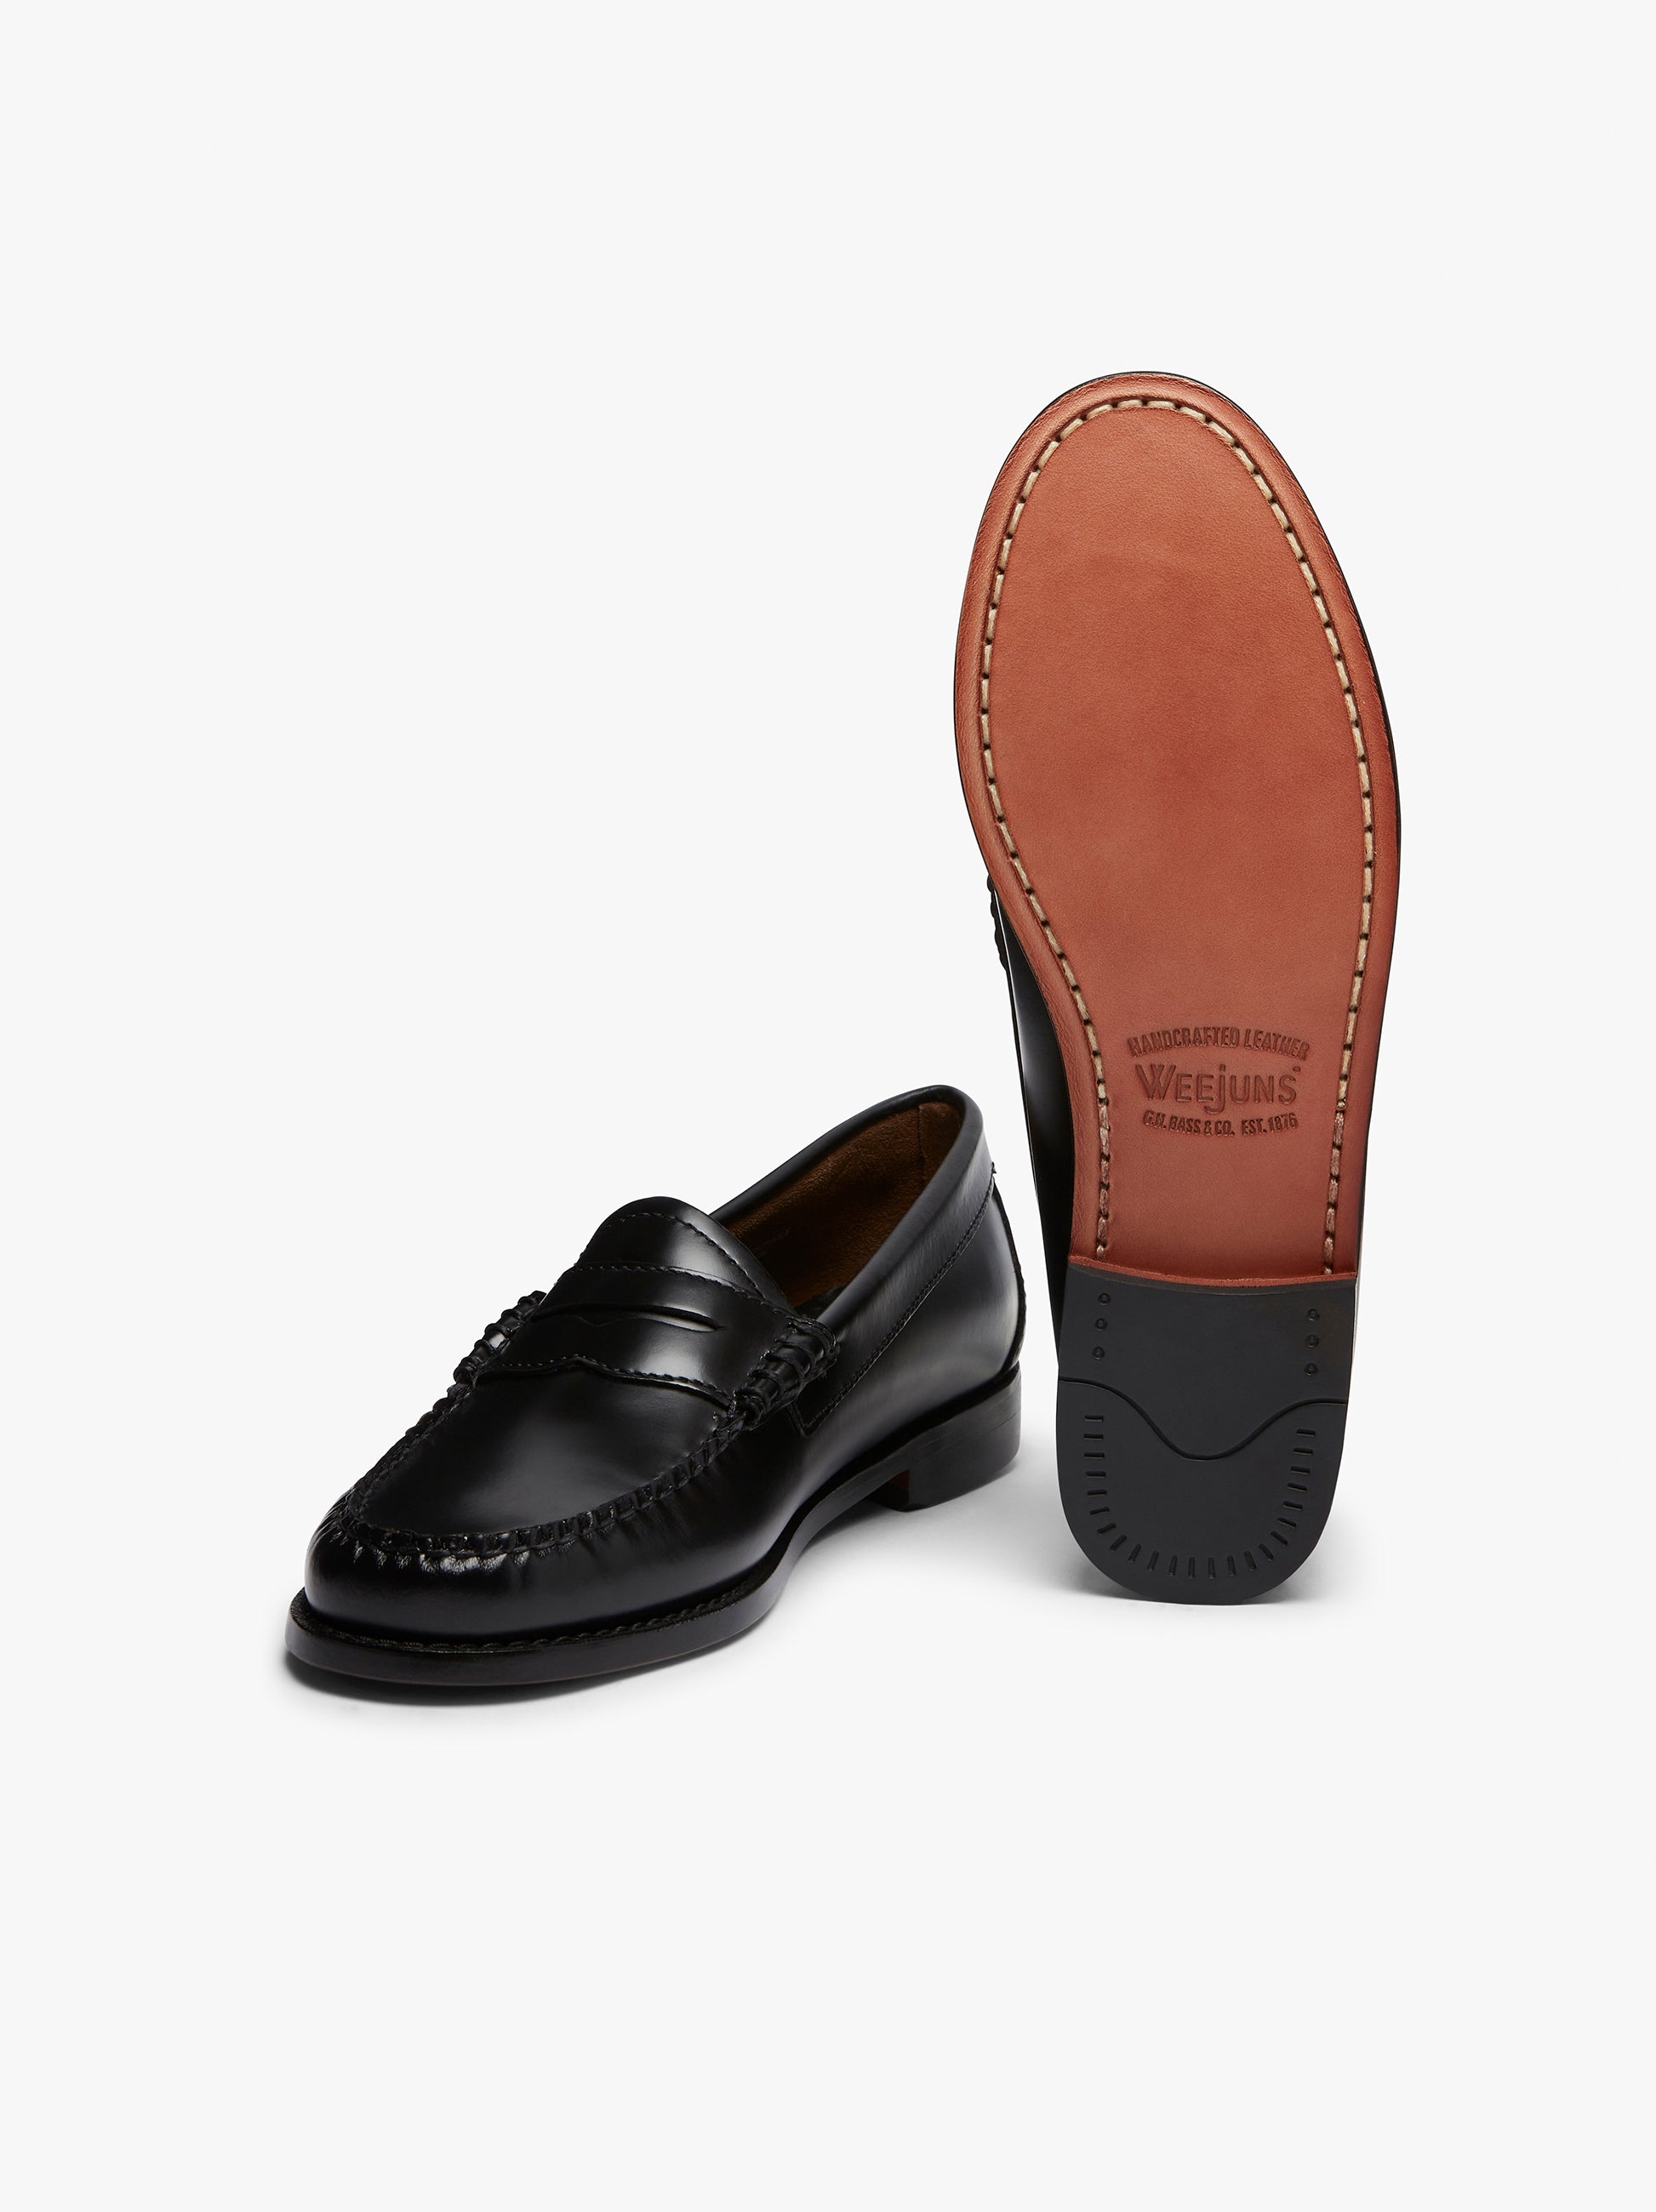 Black Penny Loafers Womens | Black Leather Penny Loafers Womens